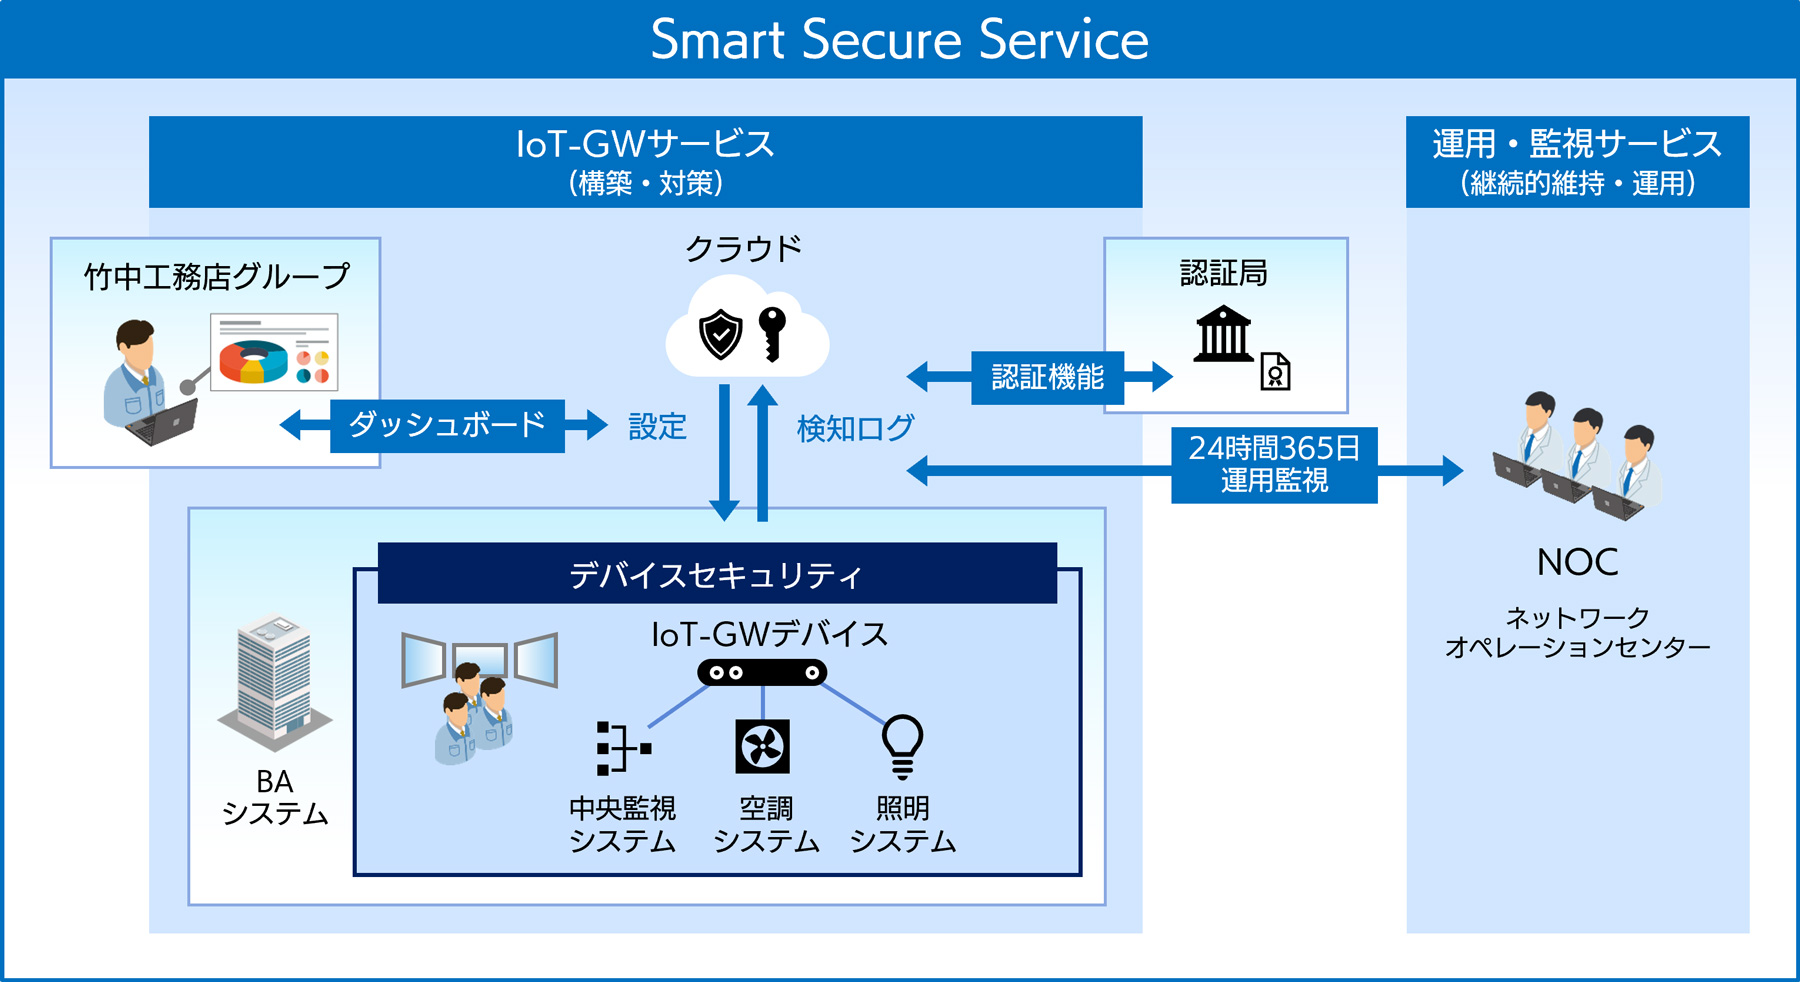 Smart Secure Service図